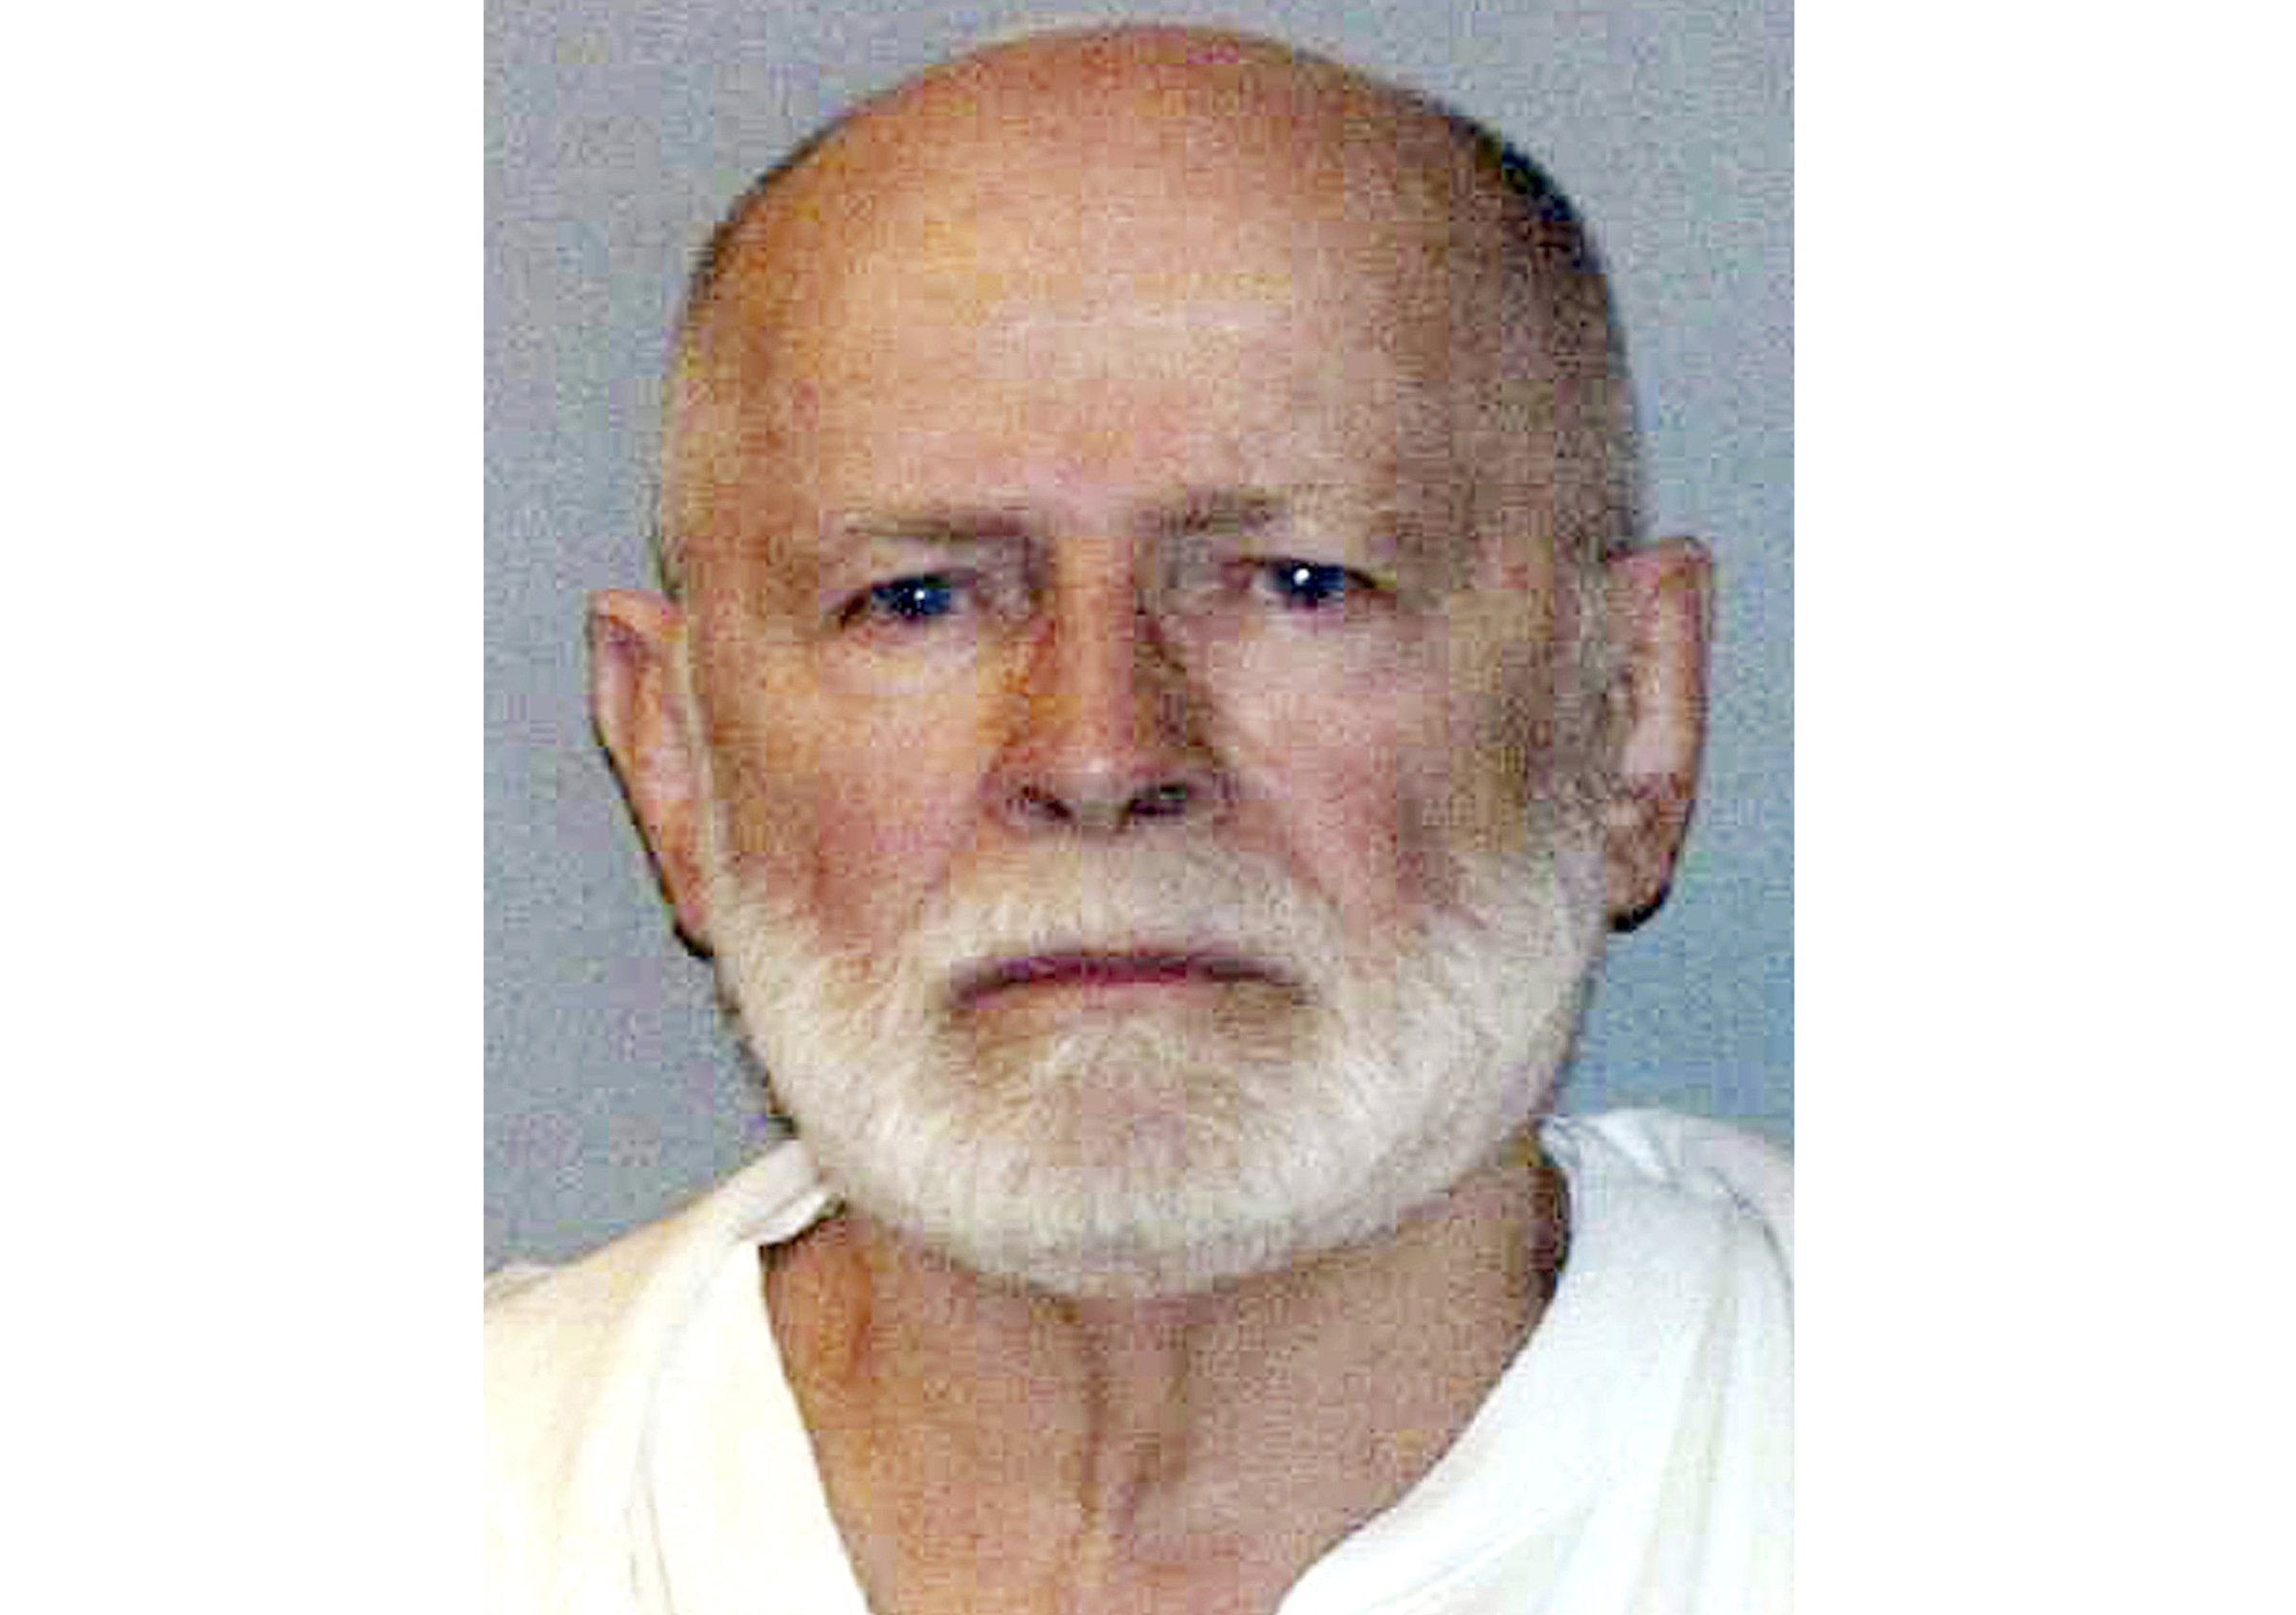 3 Charged with Killing Boston Gangster Whitey Bulger in 2018